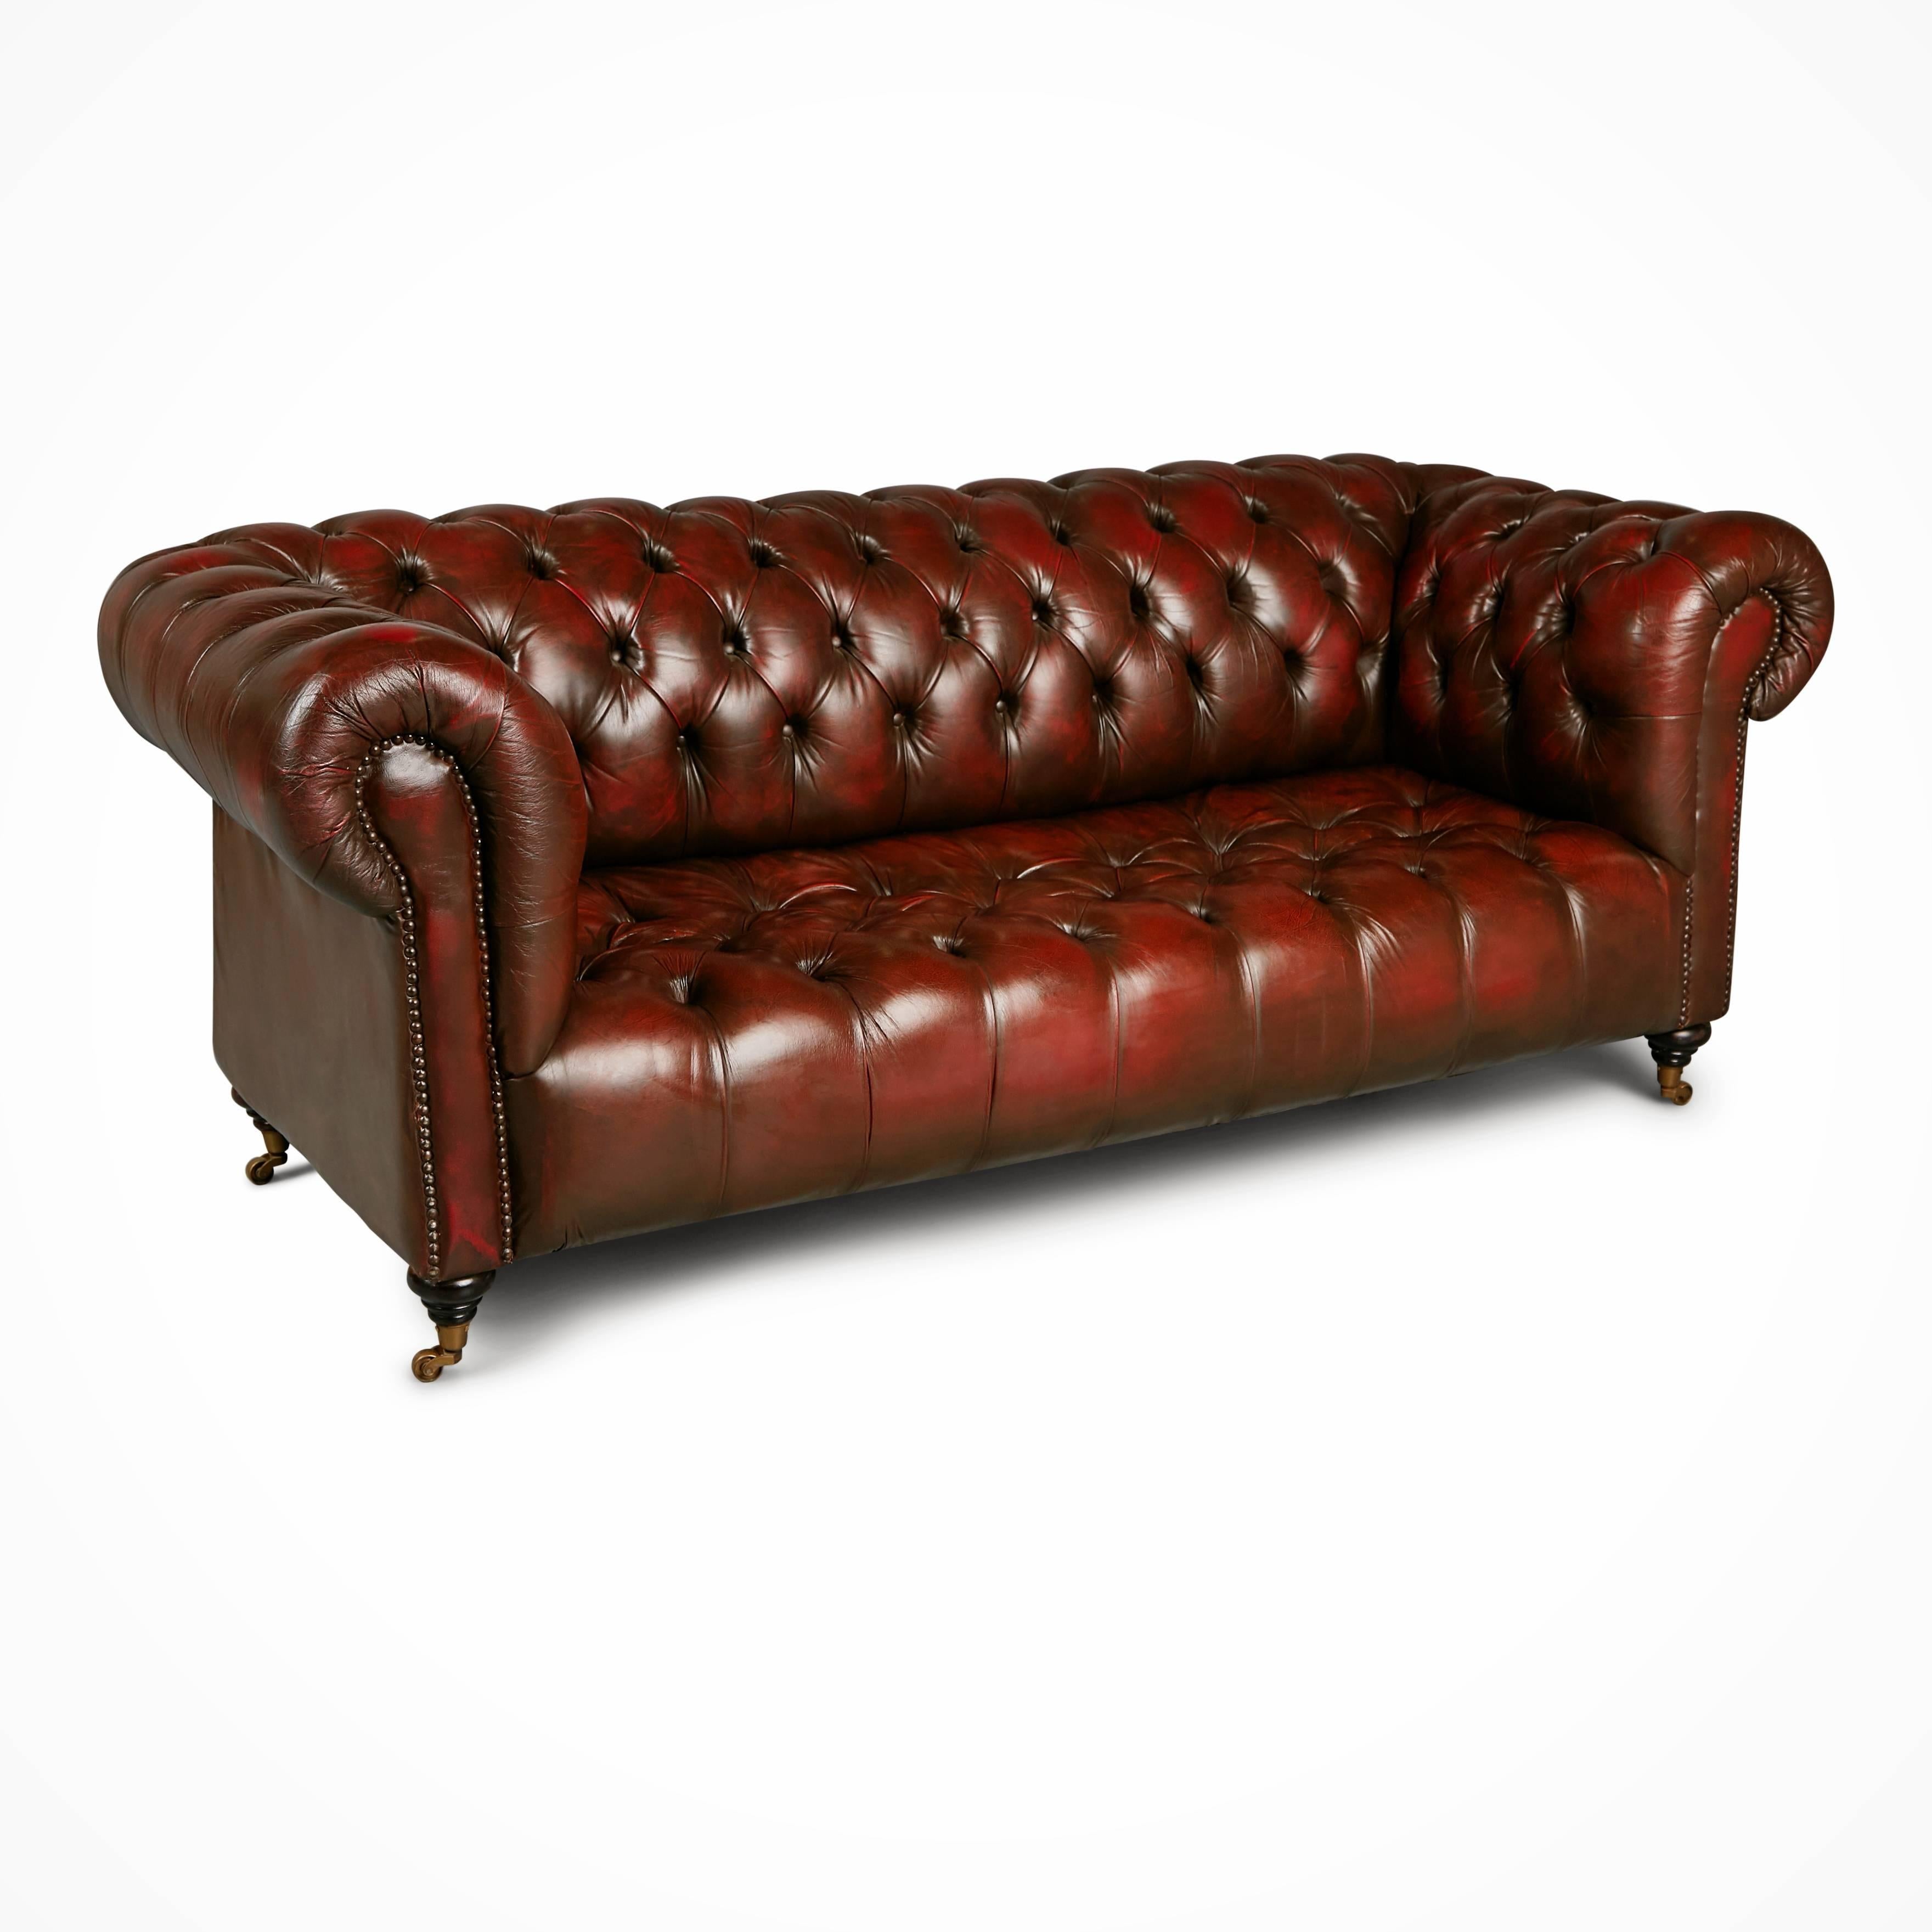 Handsome Chesterfield sofa displaying the classic attributes of this time honored design including the rolled back and armrests. This sofa is upholstered in a rich oxblood leather which has been intentionally distressed as well as having developed